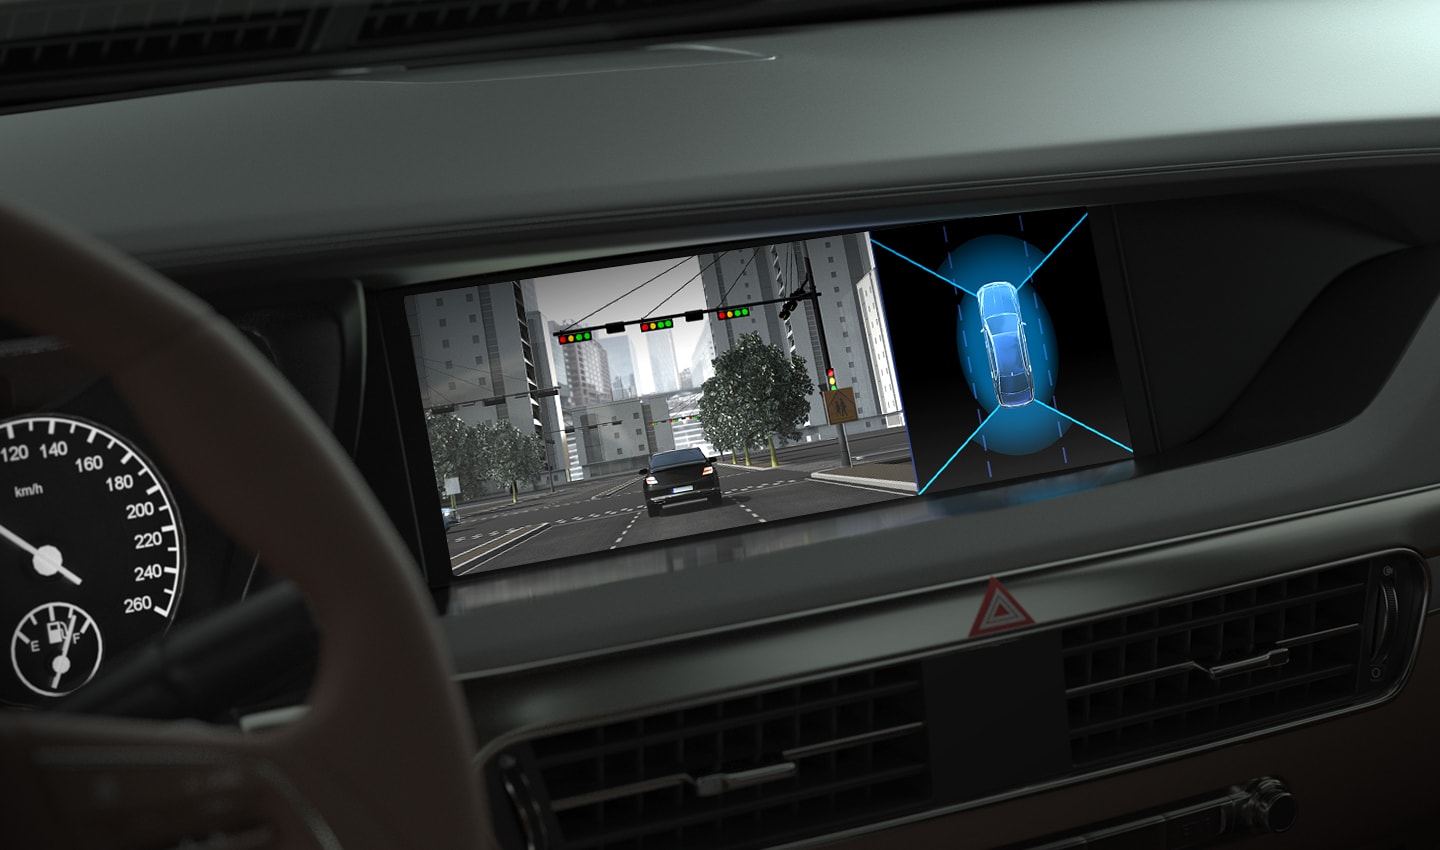 An Image illustrating LED flicker mitigation through in-vehicle surround views.